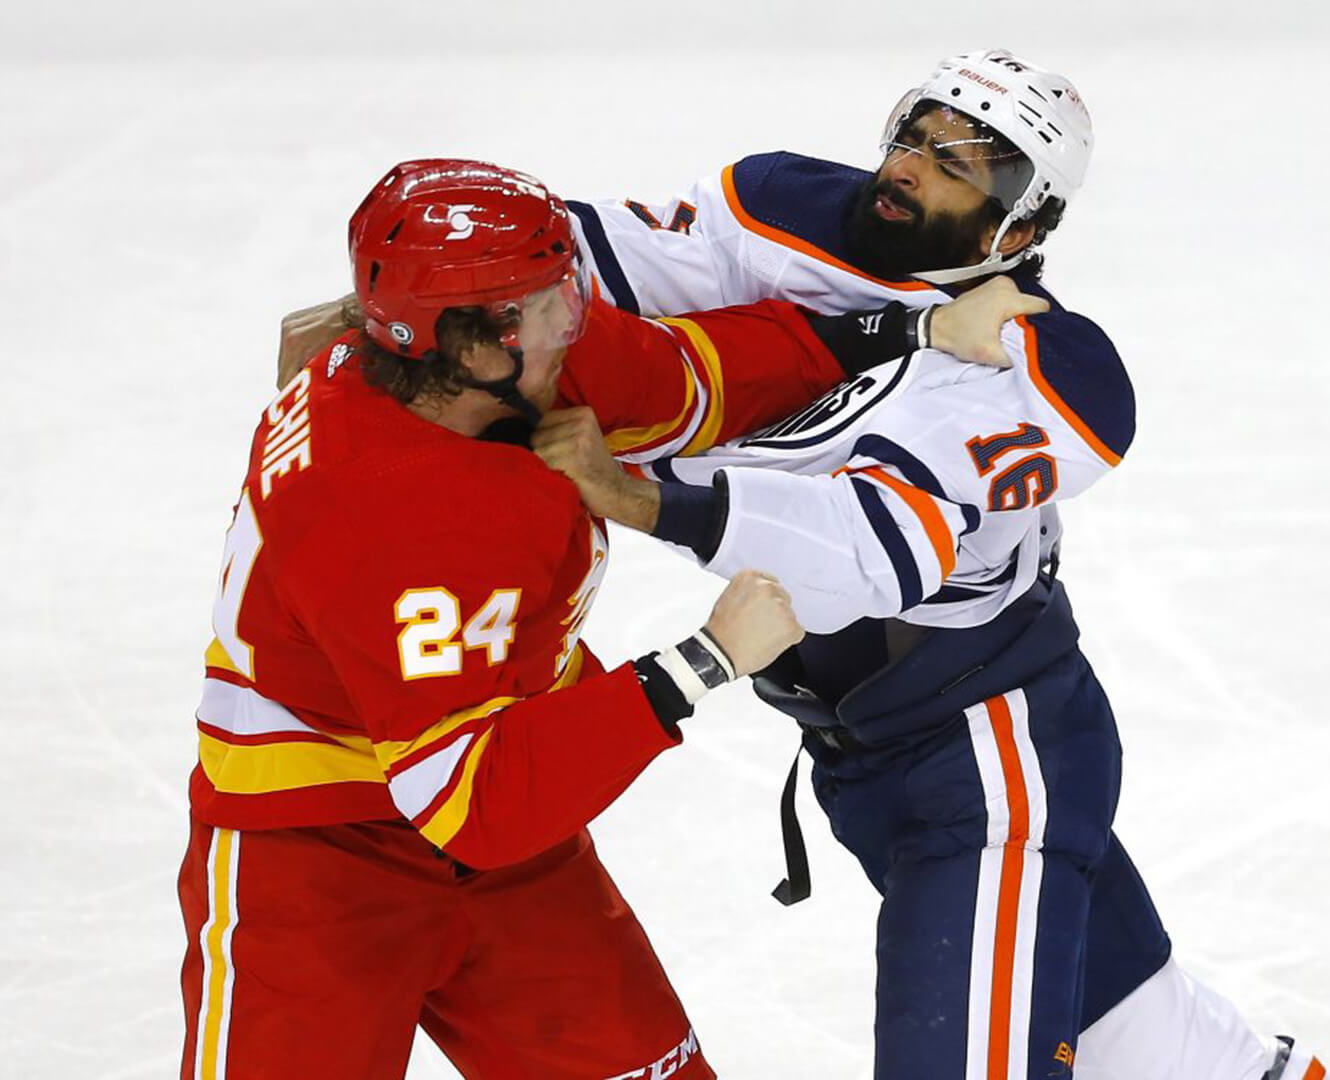 Jujar Khaira of the Edmonton Oilers was knocked out in a fight by Brett Ritchie